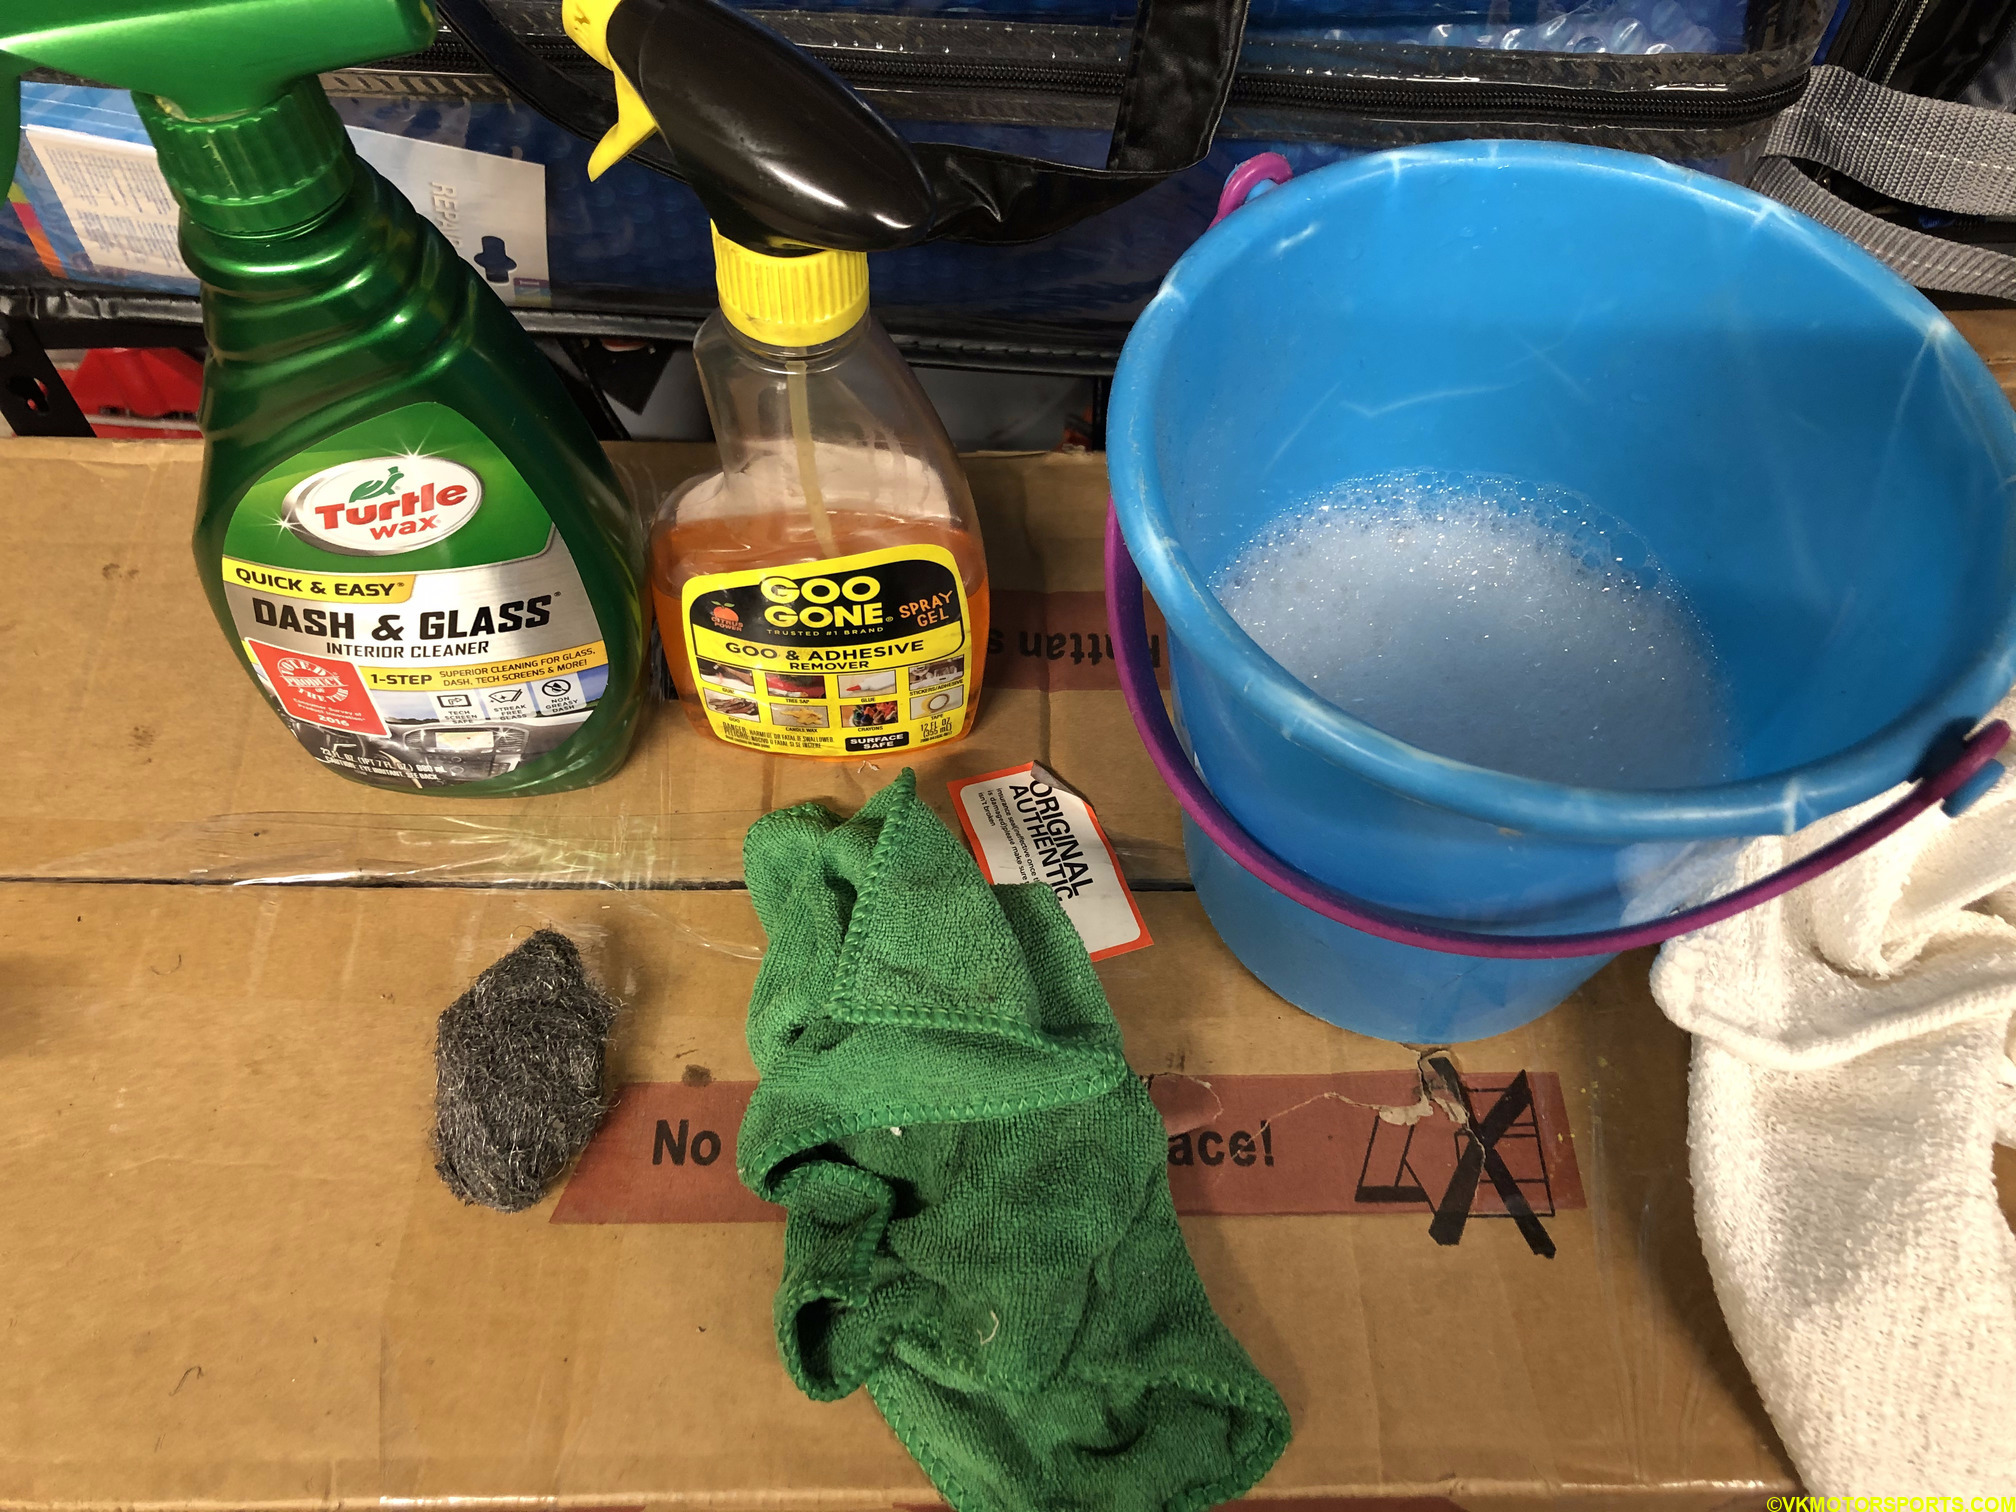 Figure 4. Cleaning supplies used